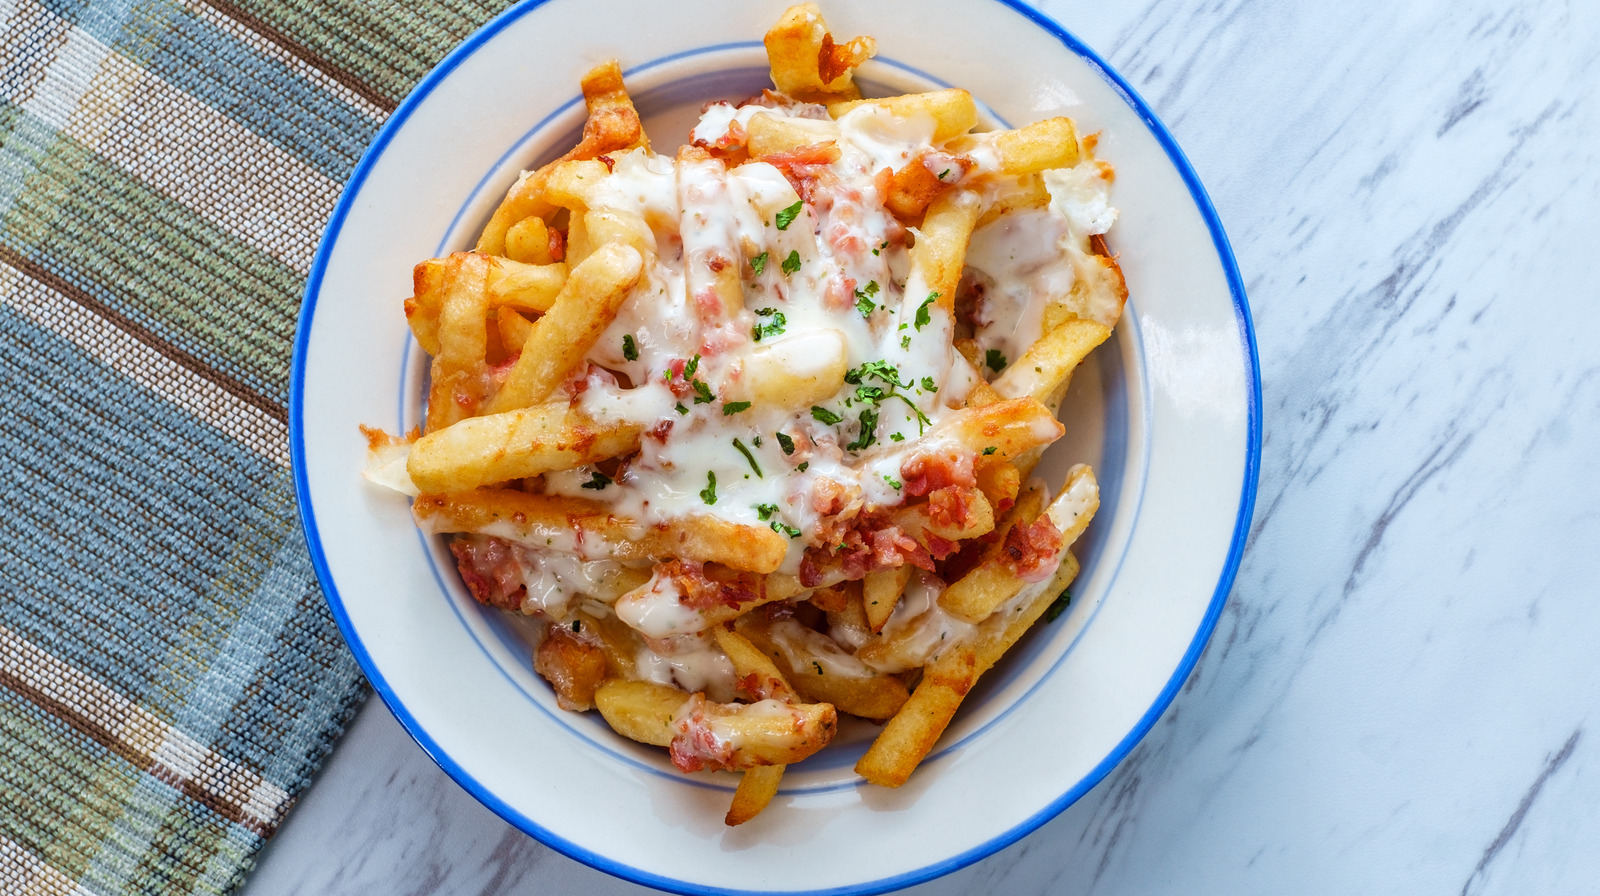 https://www.thedailymeal.com/img/gallery/fast-food-loaded-fries-ranked/l-intro-1670738904.jpg